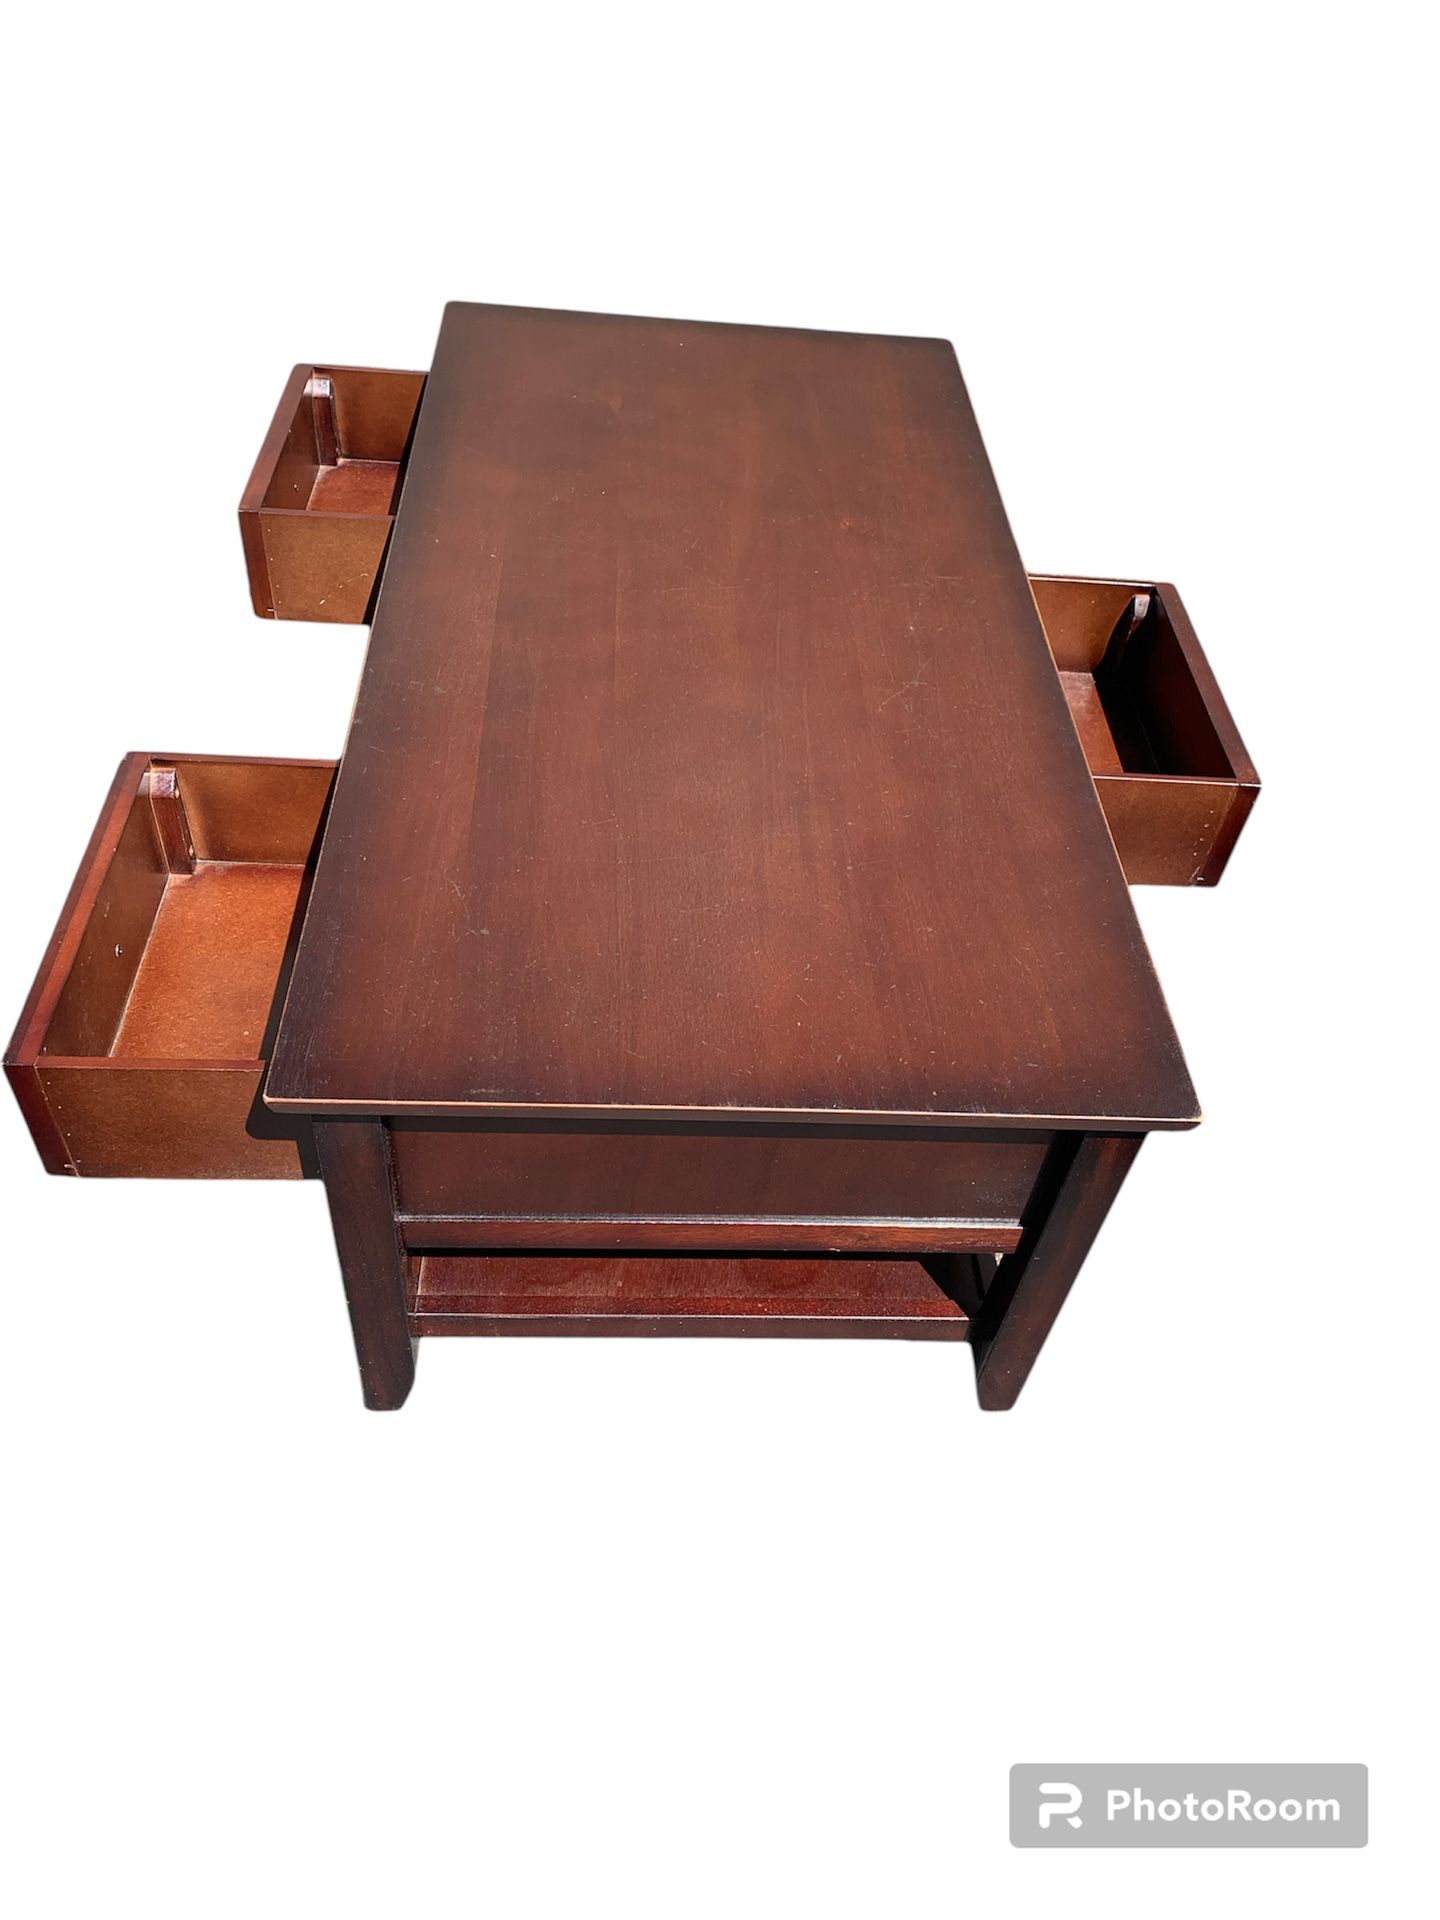 Coffee table with 3 drawers that open to both sides.  45 3/4 W x 23 1/4 D x 18 1/2 H 